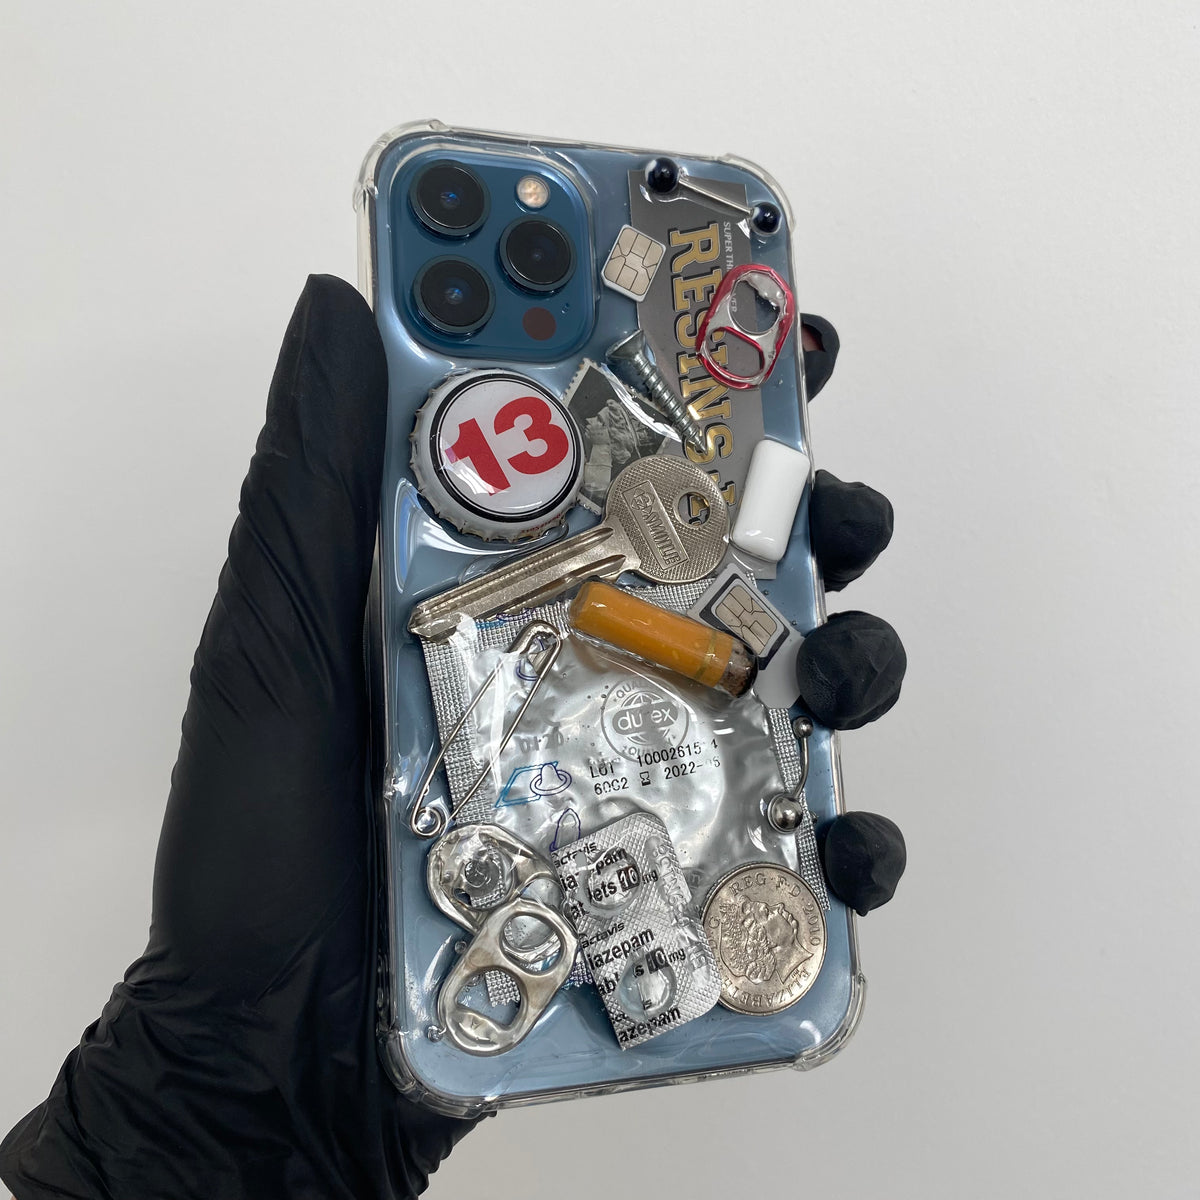 Transparent resin iPhone phone case with embedded items, including; can tabs, bottle cap, silver key, stamp, condom, safety pics, piercings, coin, gum, sim cards, screw nail, cigarette and empty pill packaging.